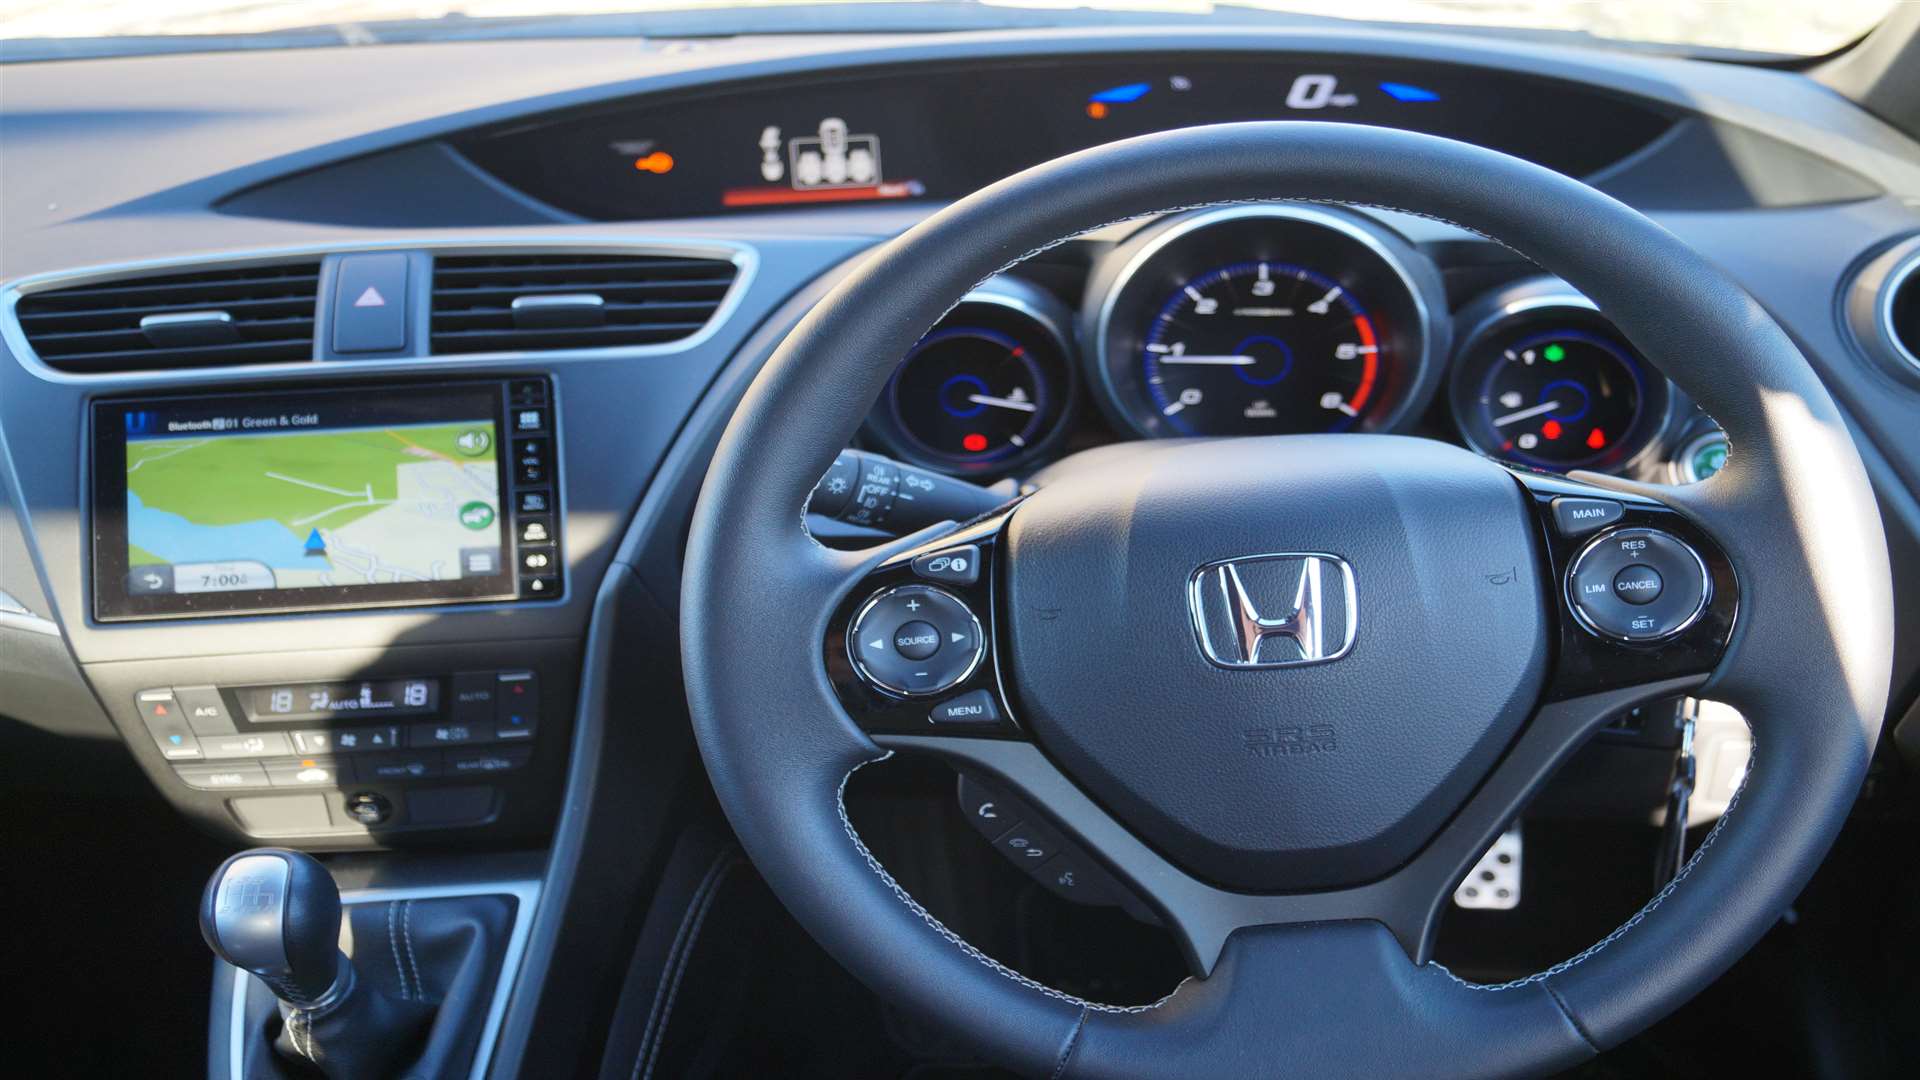 The split level dashboard is one of the Civic's distinguishing features